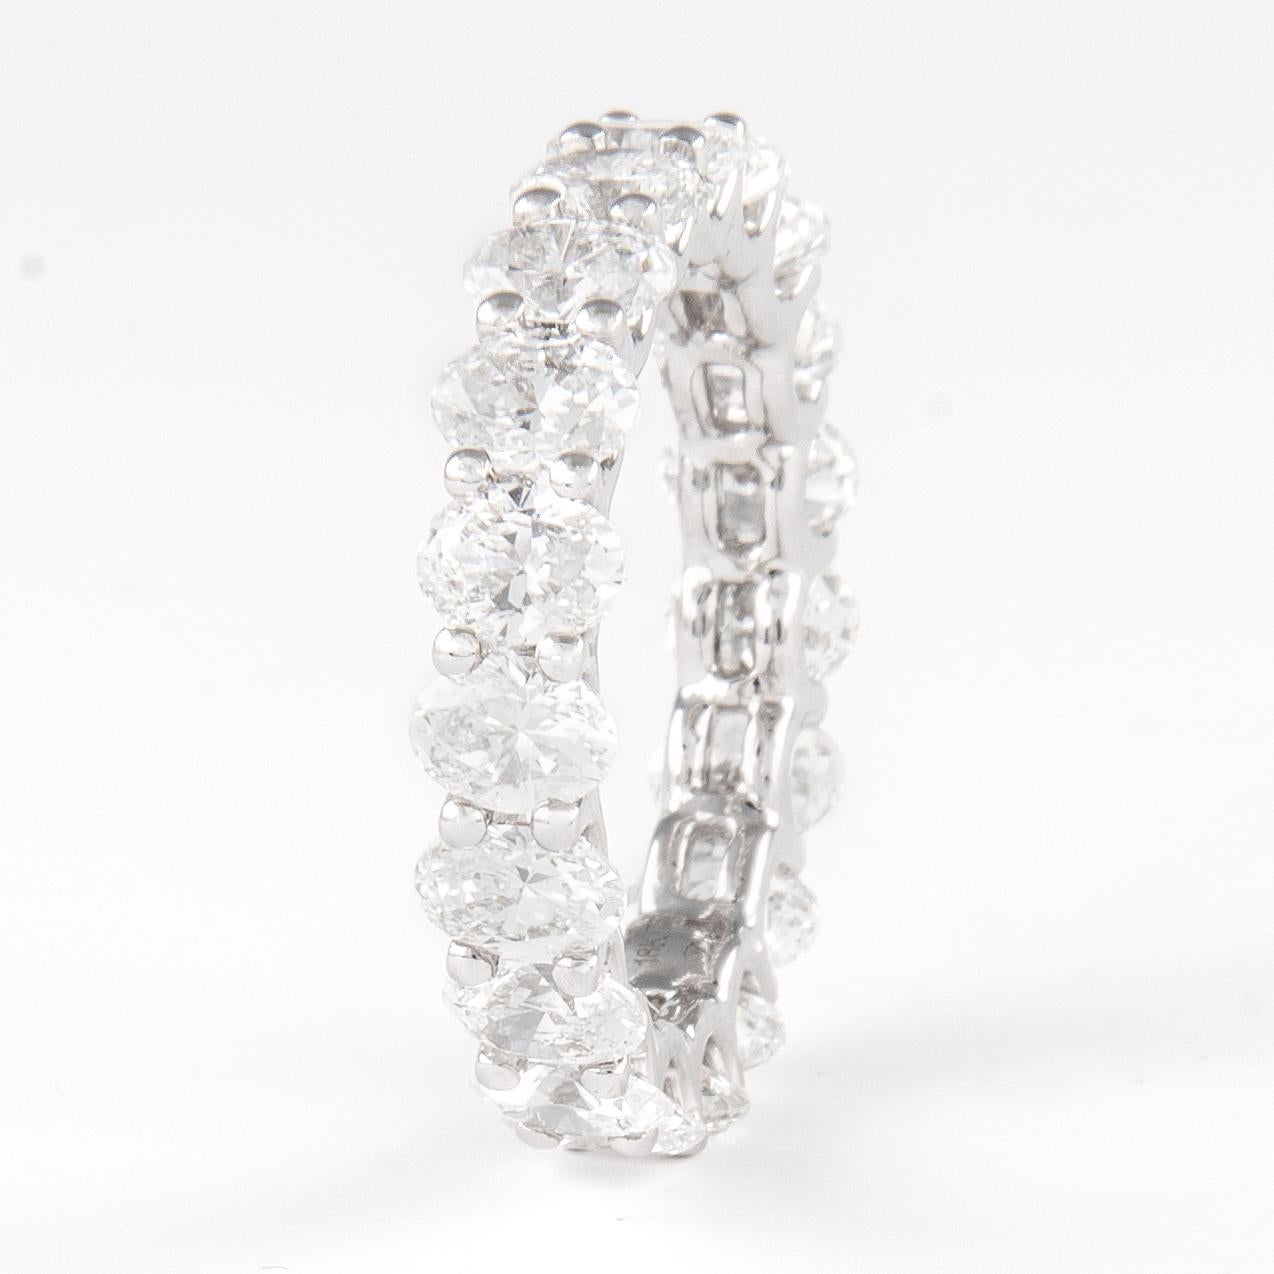 Stunning oval cut diamond eternity band, by Alexander Beverly Hills.
19 cut diamonds, 4.26 carats total. Approximately F color and VS clarity. Set in 18k white gold, 3.35 grams, size 6.5. 
Accommodated with an up-to-date appraisal by a GIA G.G. once